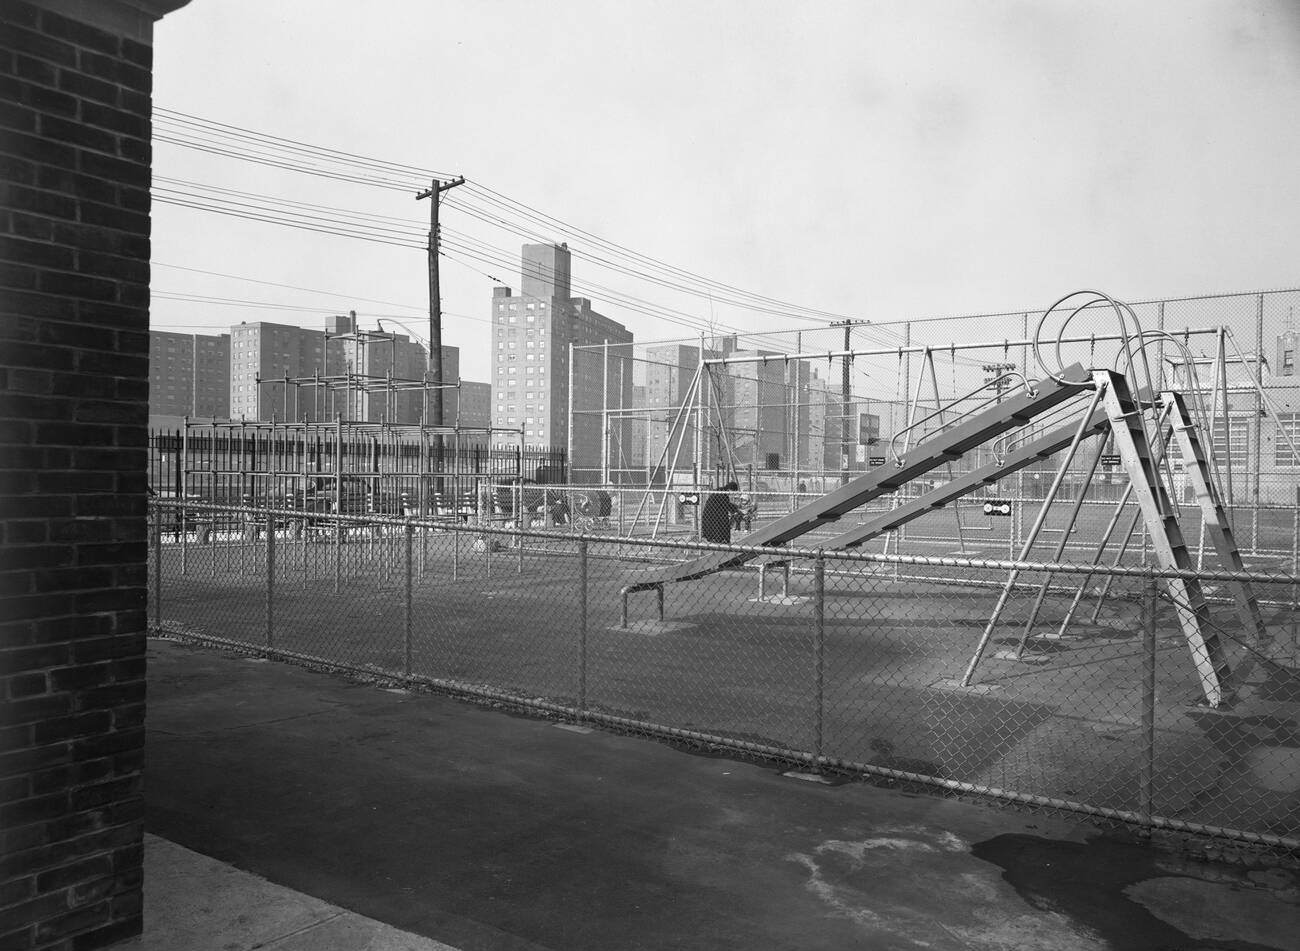 School Playground (Ps 122), Kingsbridge Rd. And Bailey Ave., Bronx, 1960S